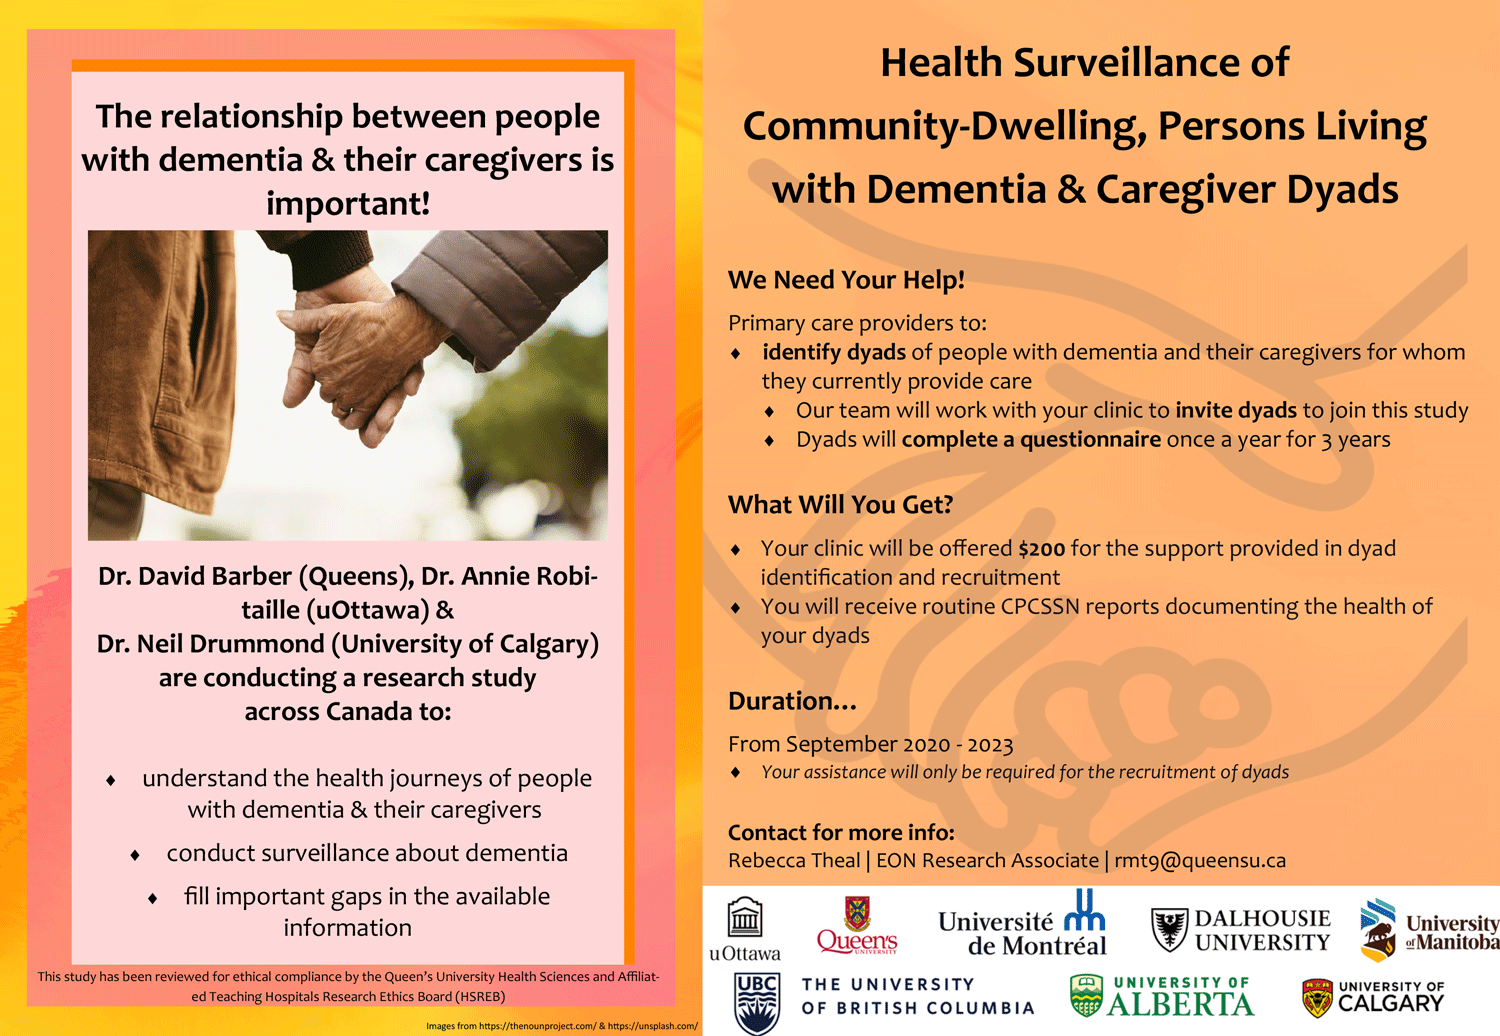 Poster for Persons Living with Dementia and Caregiver Dyads study